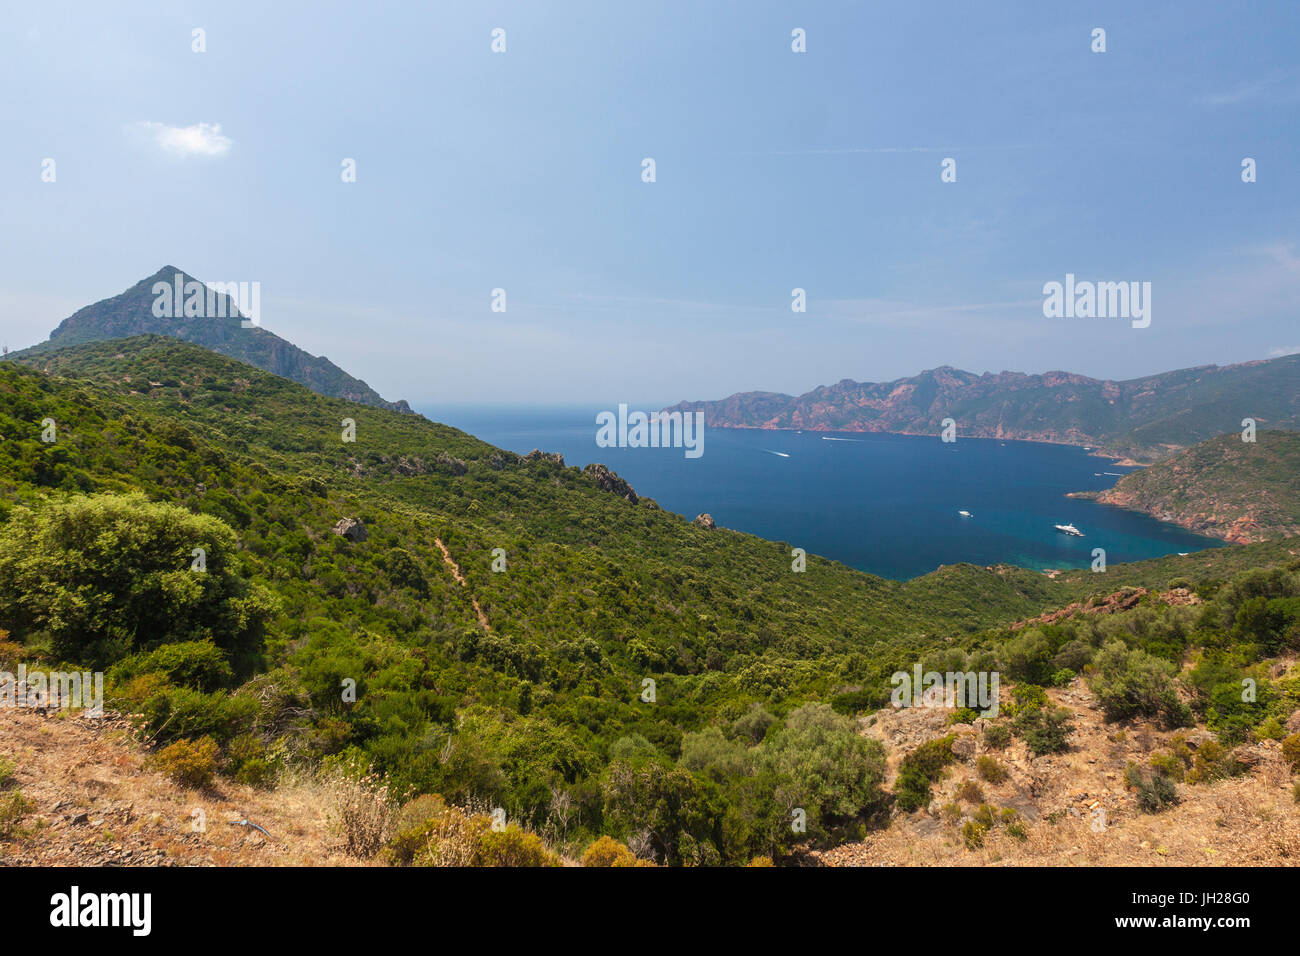 Top view of turquoise sea and bay framed by green vegetation on the promontory, Porto, Southern Corsica, France, Mediterranean Stock Photo